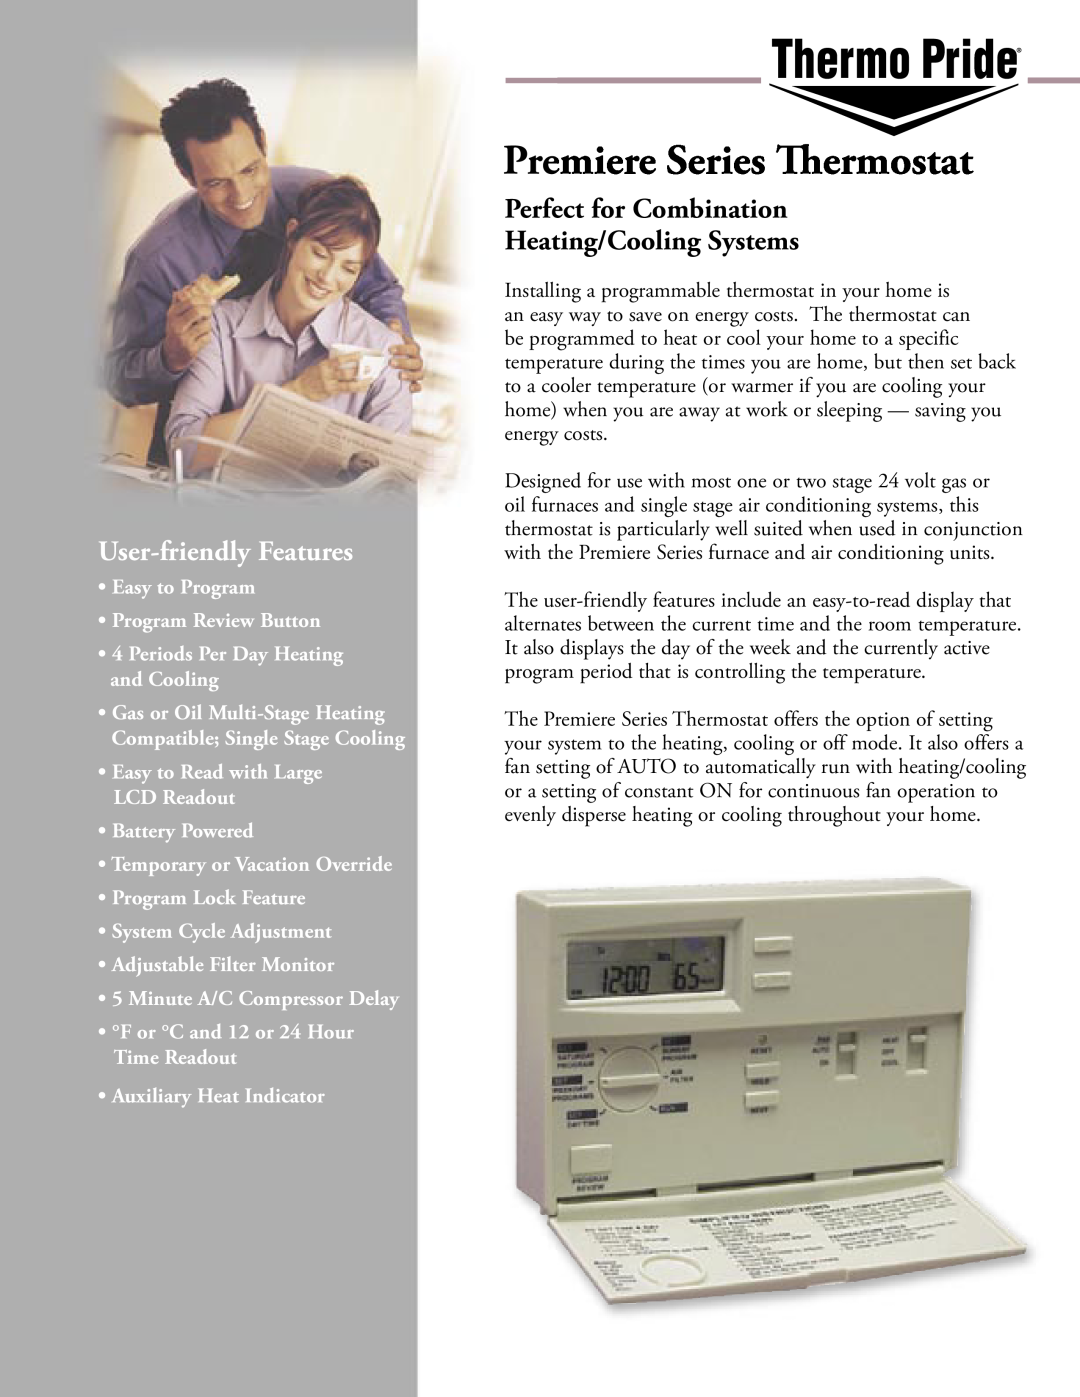 Thermo Products manual Premiere Series Thermostat, User-friendlyFeatures, Easy to Program Program Review Button 